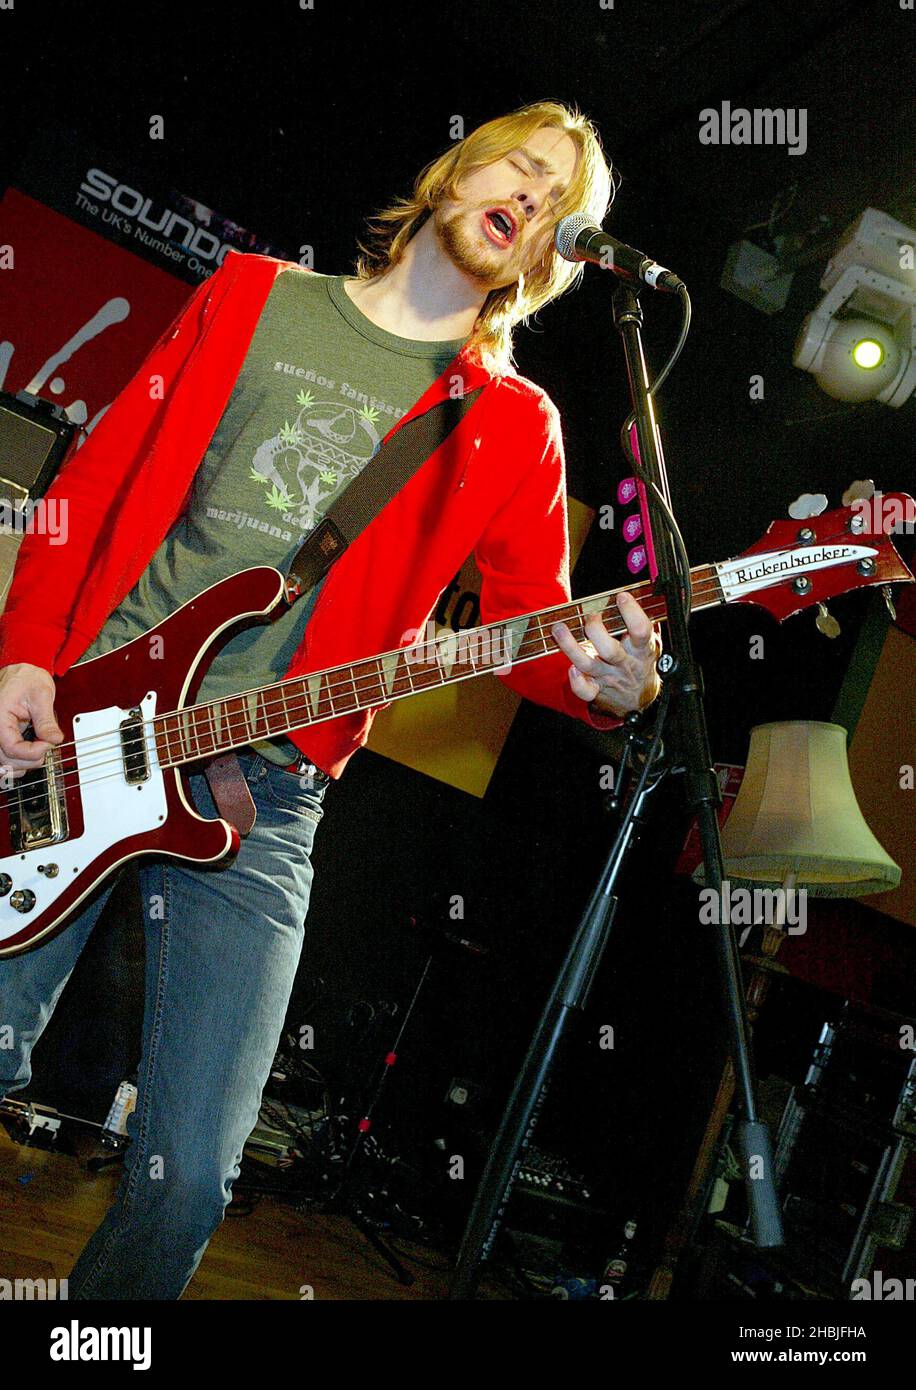 Carl Dalemo of London-based indie-rock band Razorlight play live and sign copies of their latest single 'Rip It Up', released November 29, at Virgin Megastore, Oxford Street on December 2, 2004 in London. Stock Photo